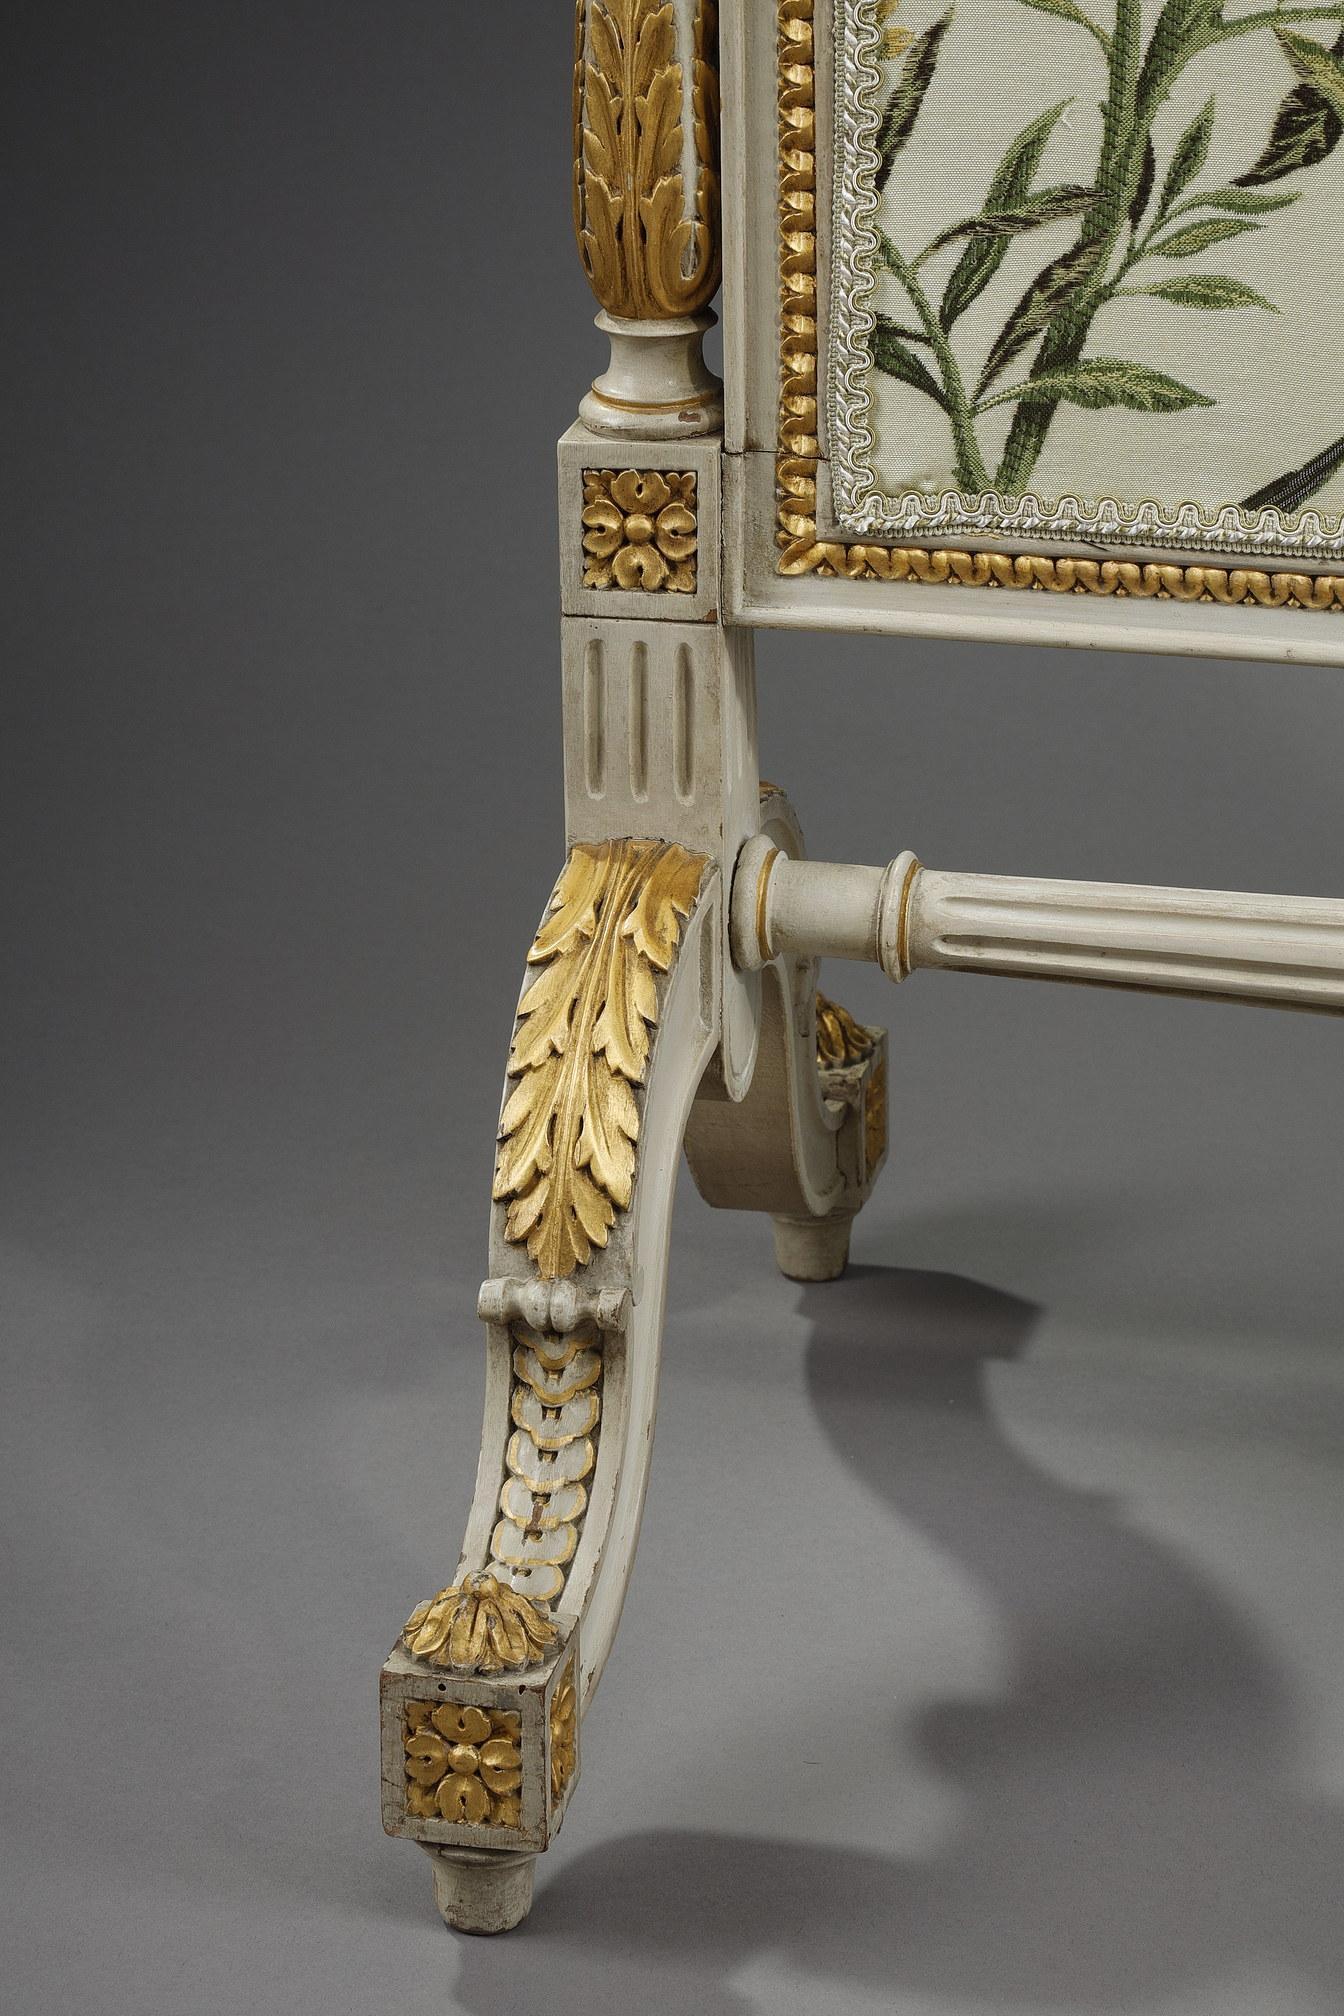 Late 19th Century Gilded Wood Fire Screen with Parrots, Louis XVI Style